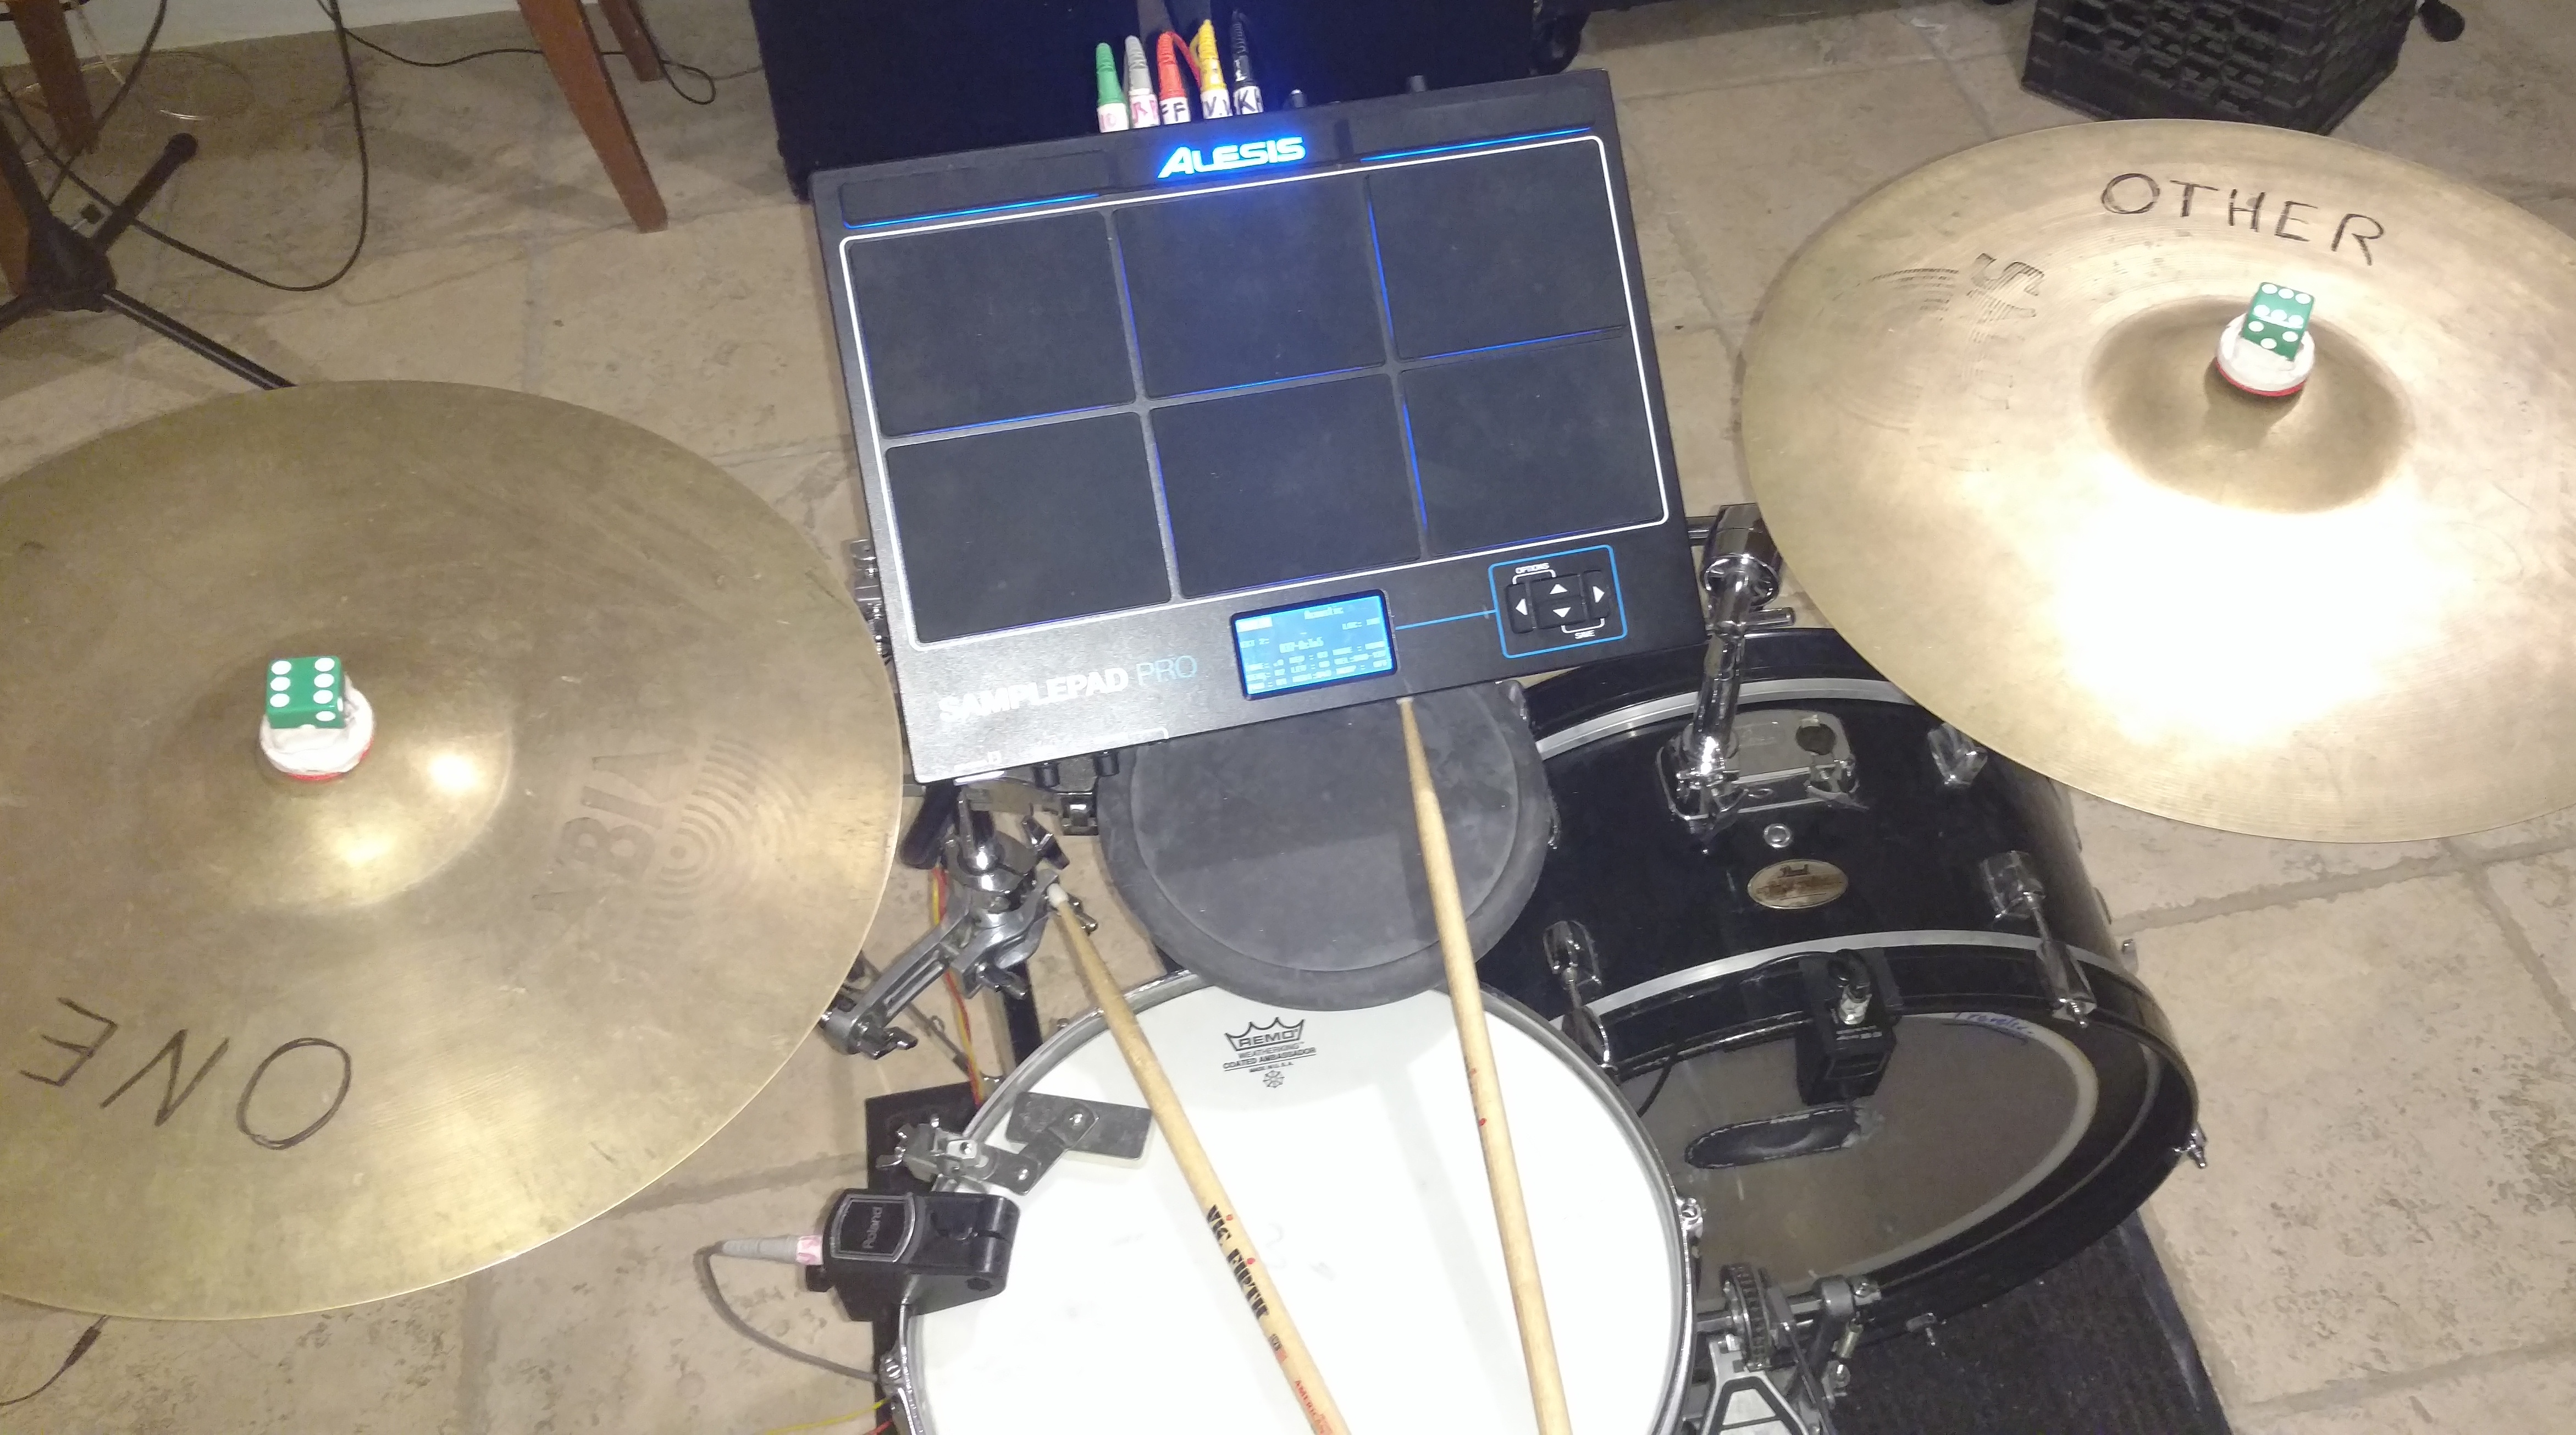 Alesis SamplePad Pro: thoughts and application of features